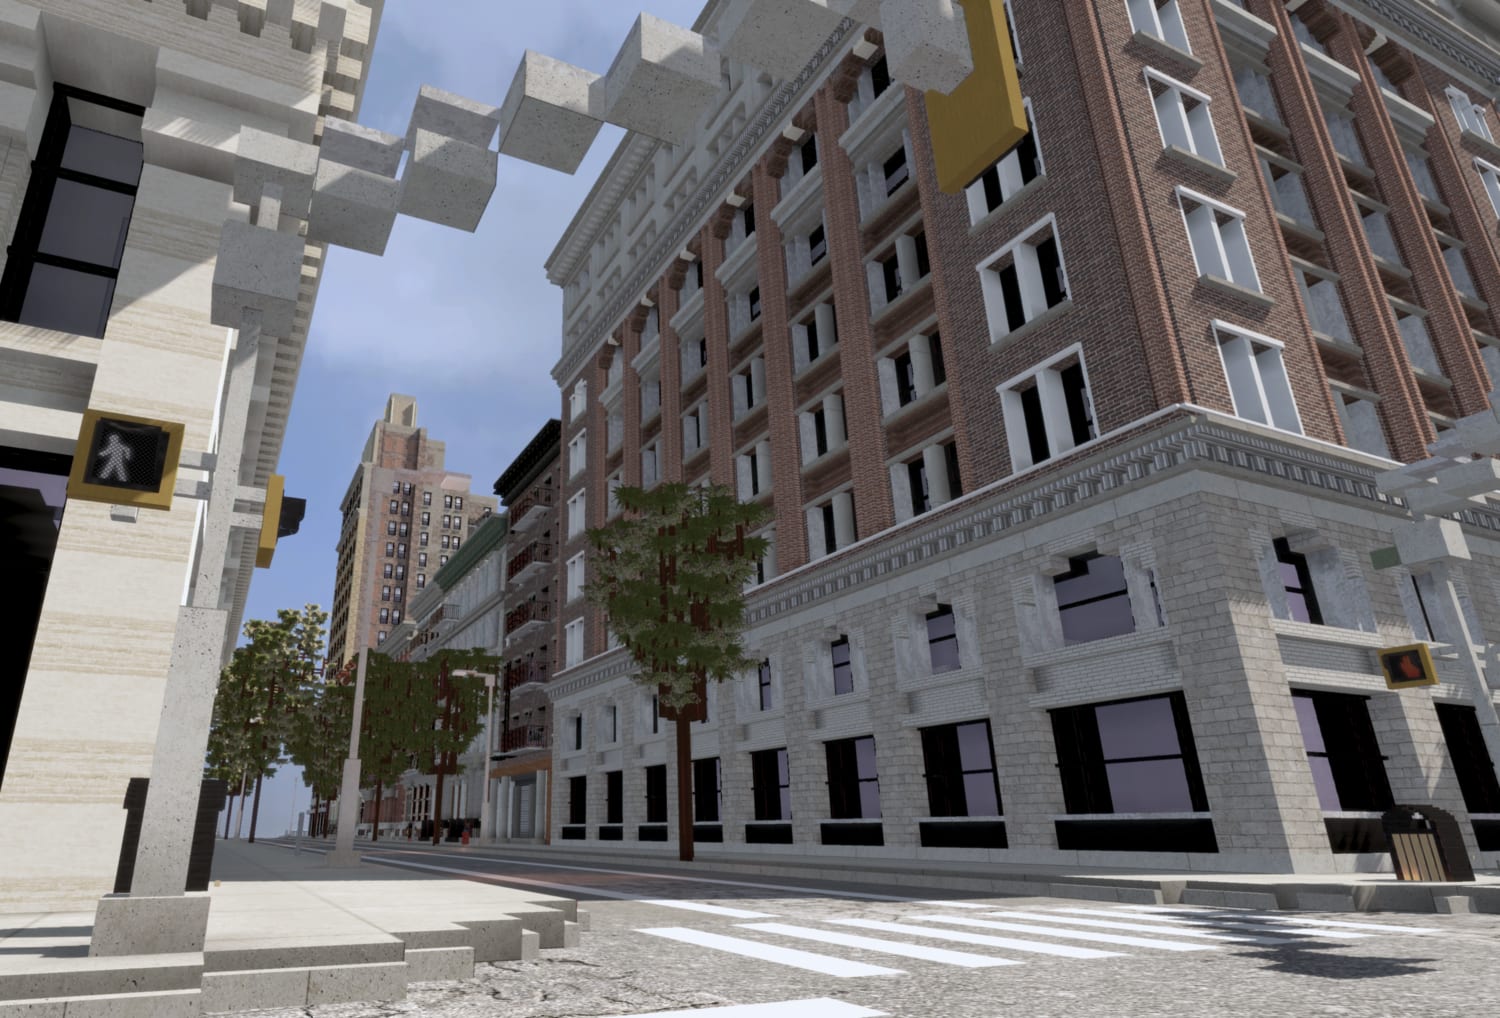 I Built a New York City style street in Minecraft.